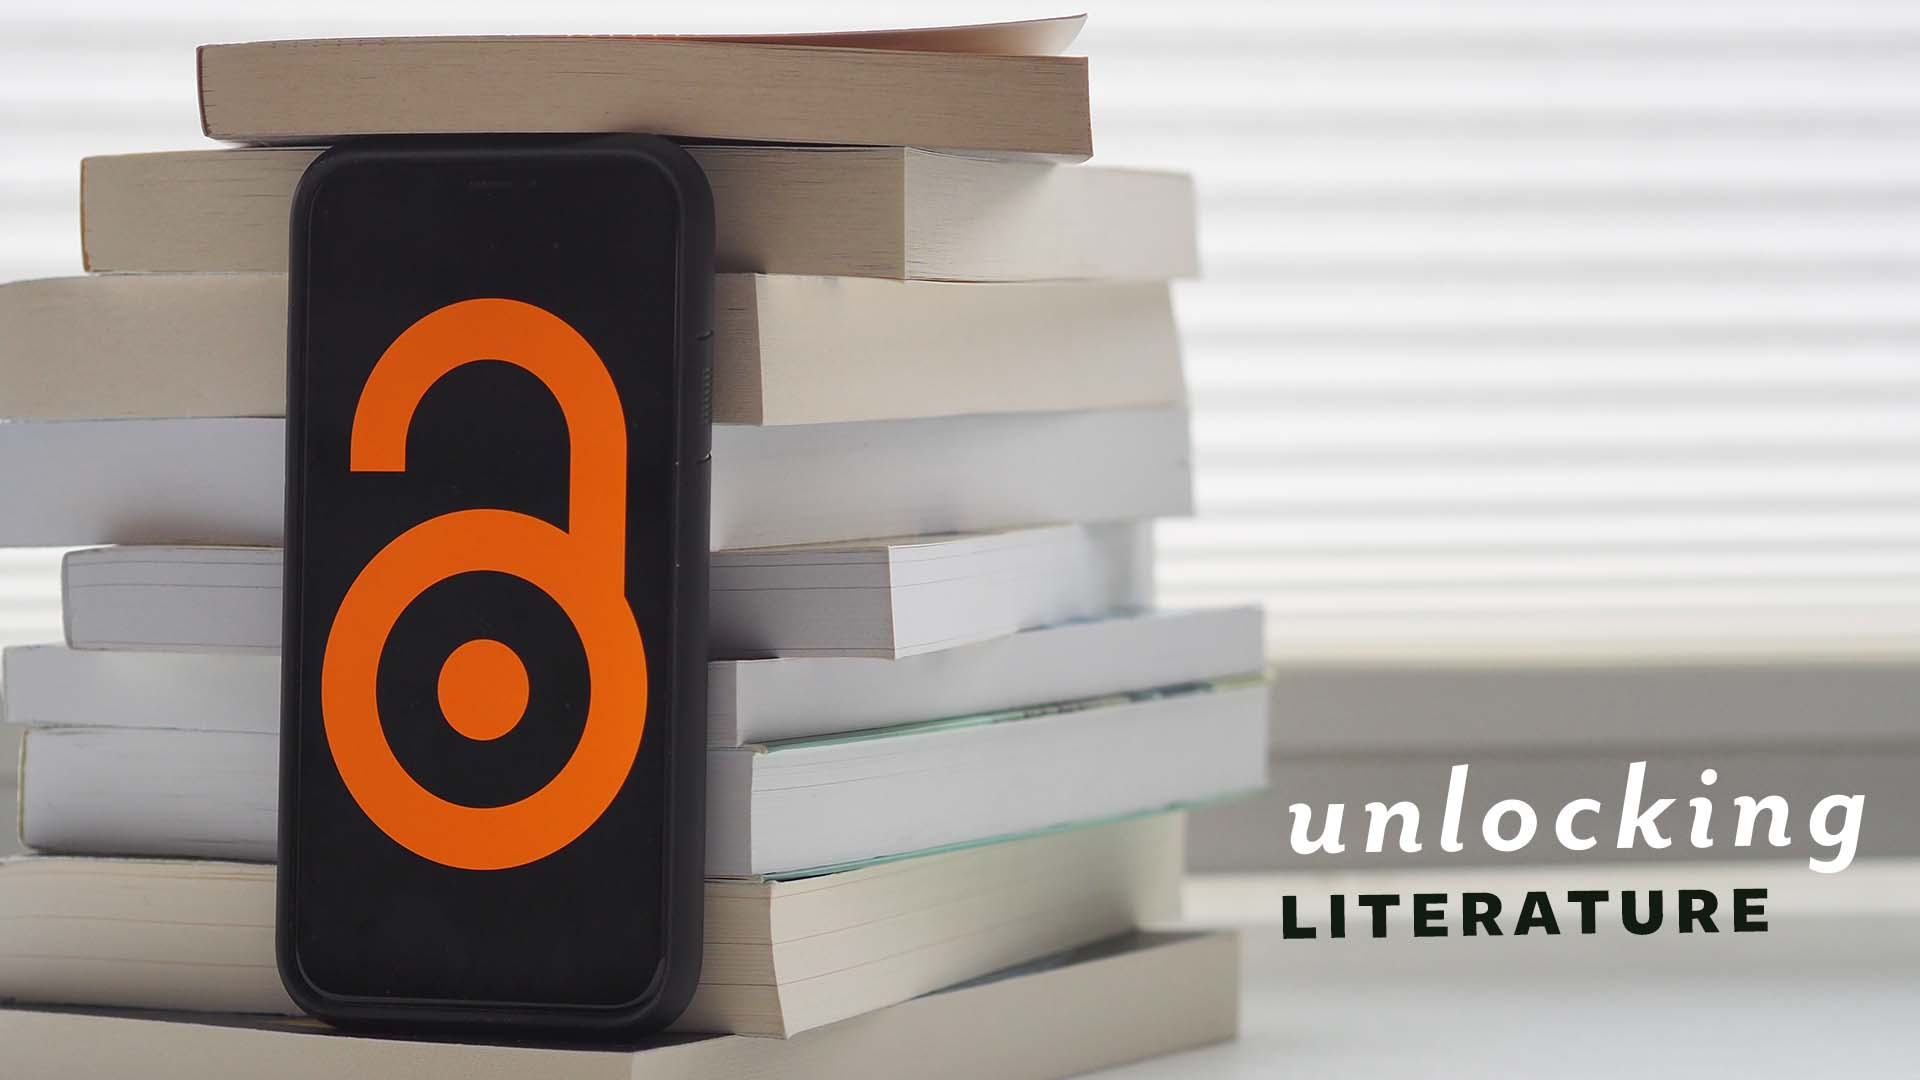 The Open Access logo (an unlocked lock) appears on a phone, which is sitting on a pile of books. The text reads "Unlocking Literature"